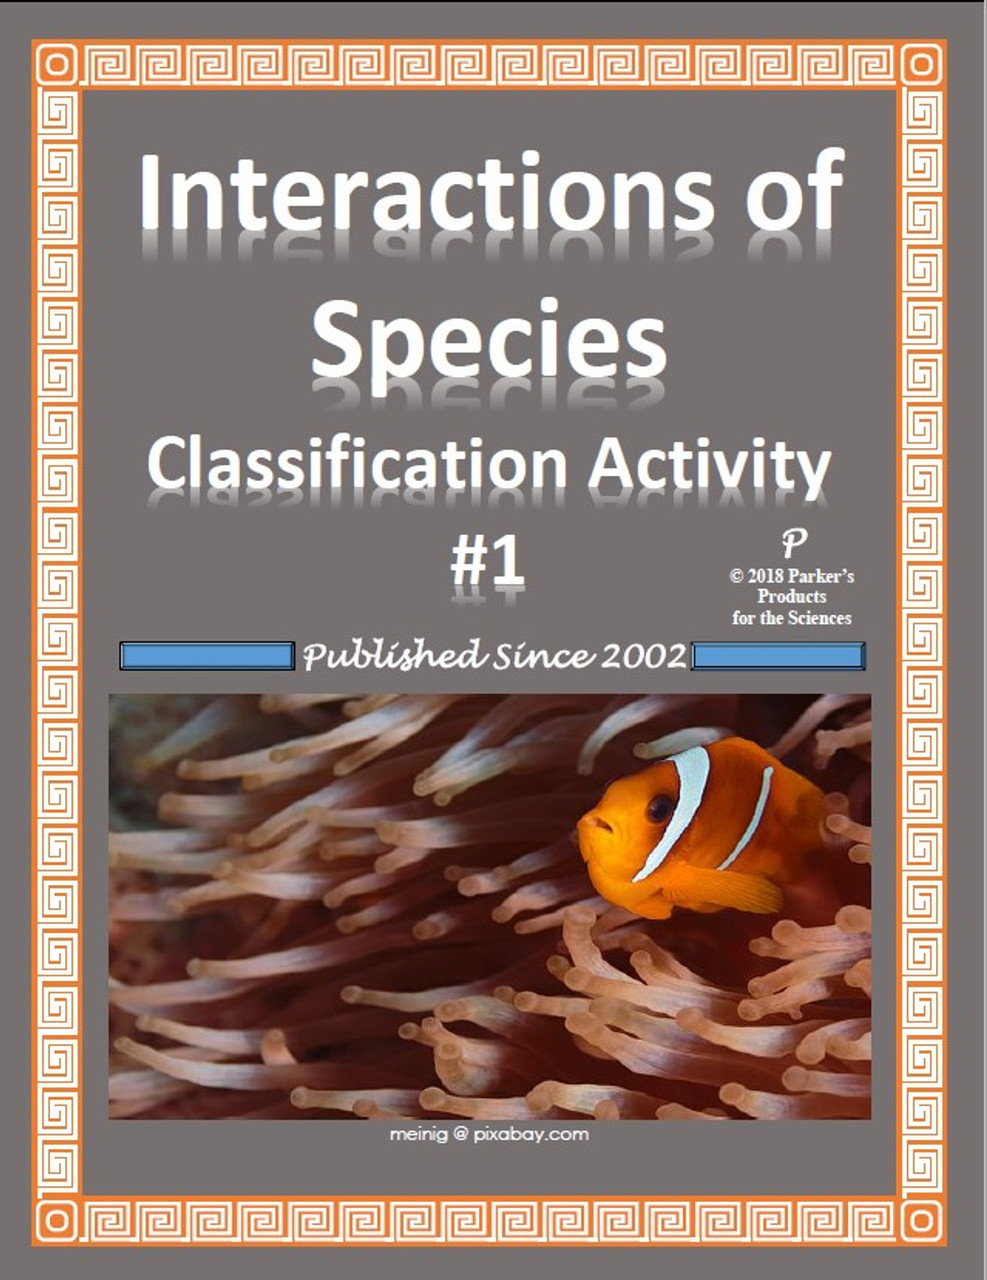 Interactions of Species Classification Activity #1